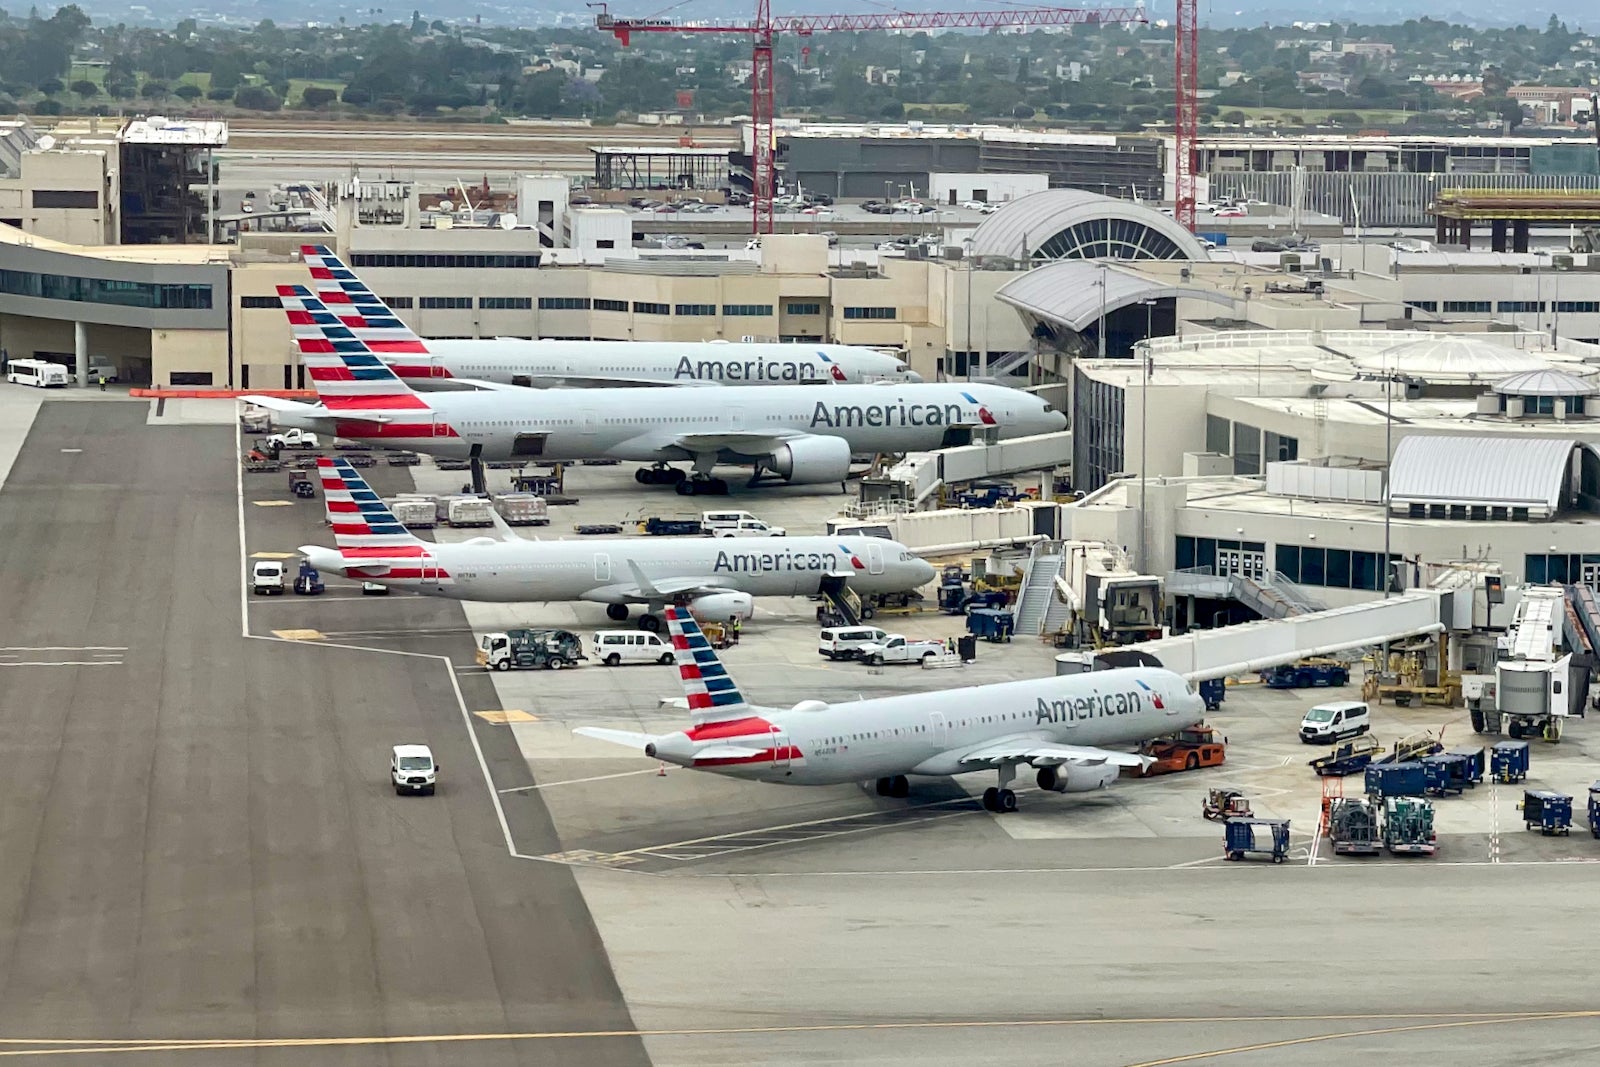 American Airlines planes Los Angeles LAX